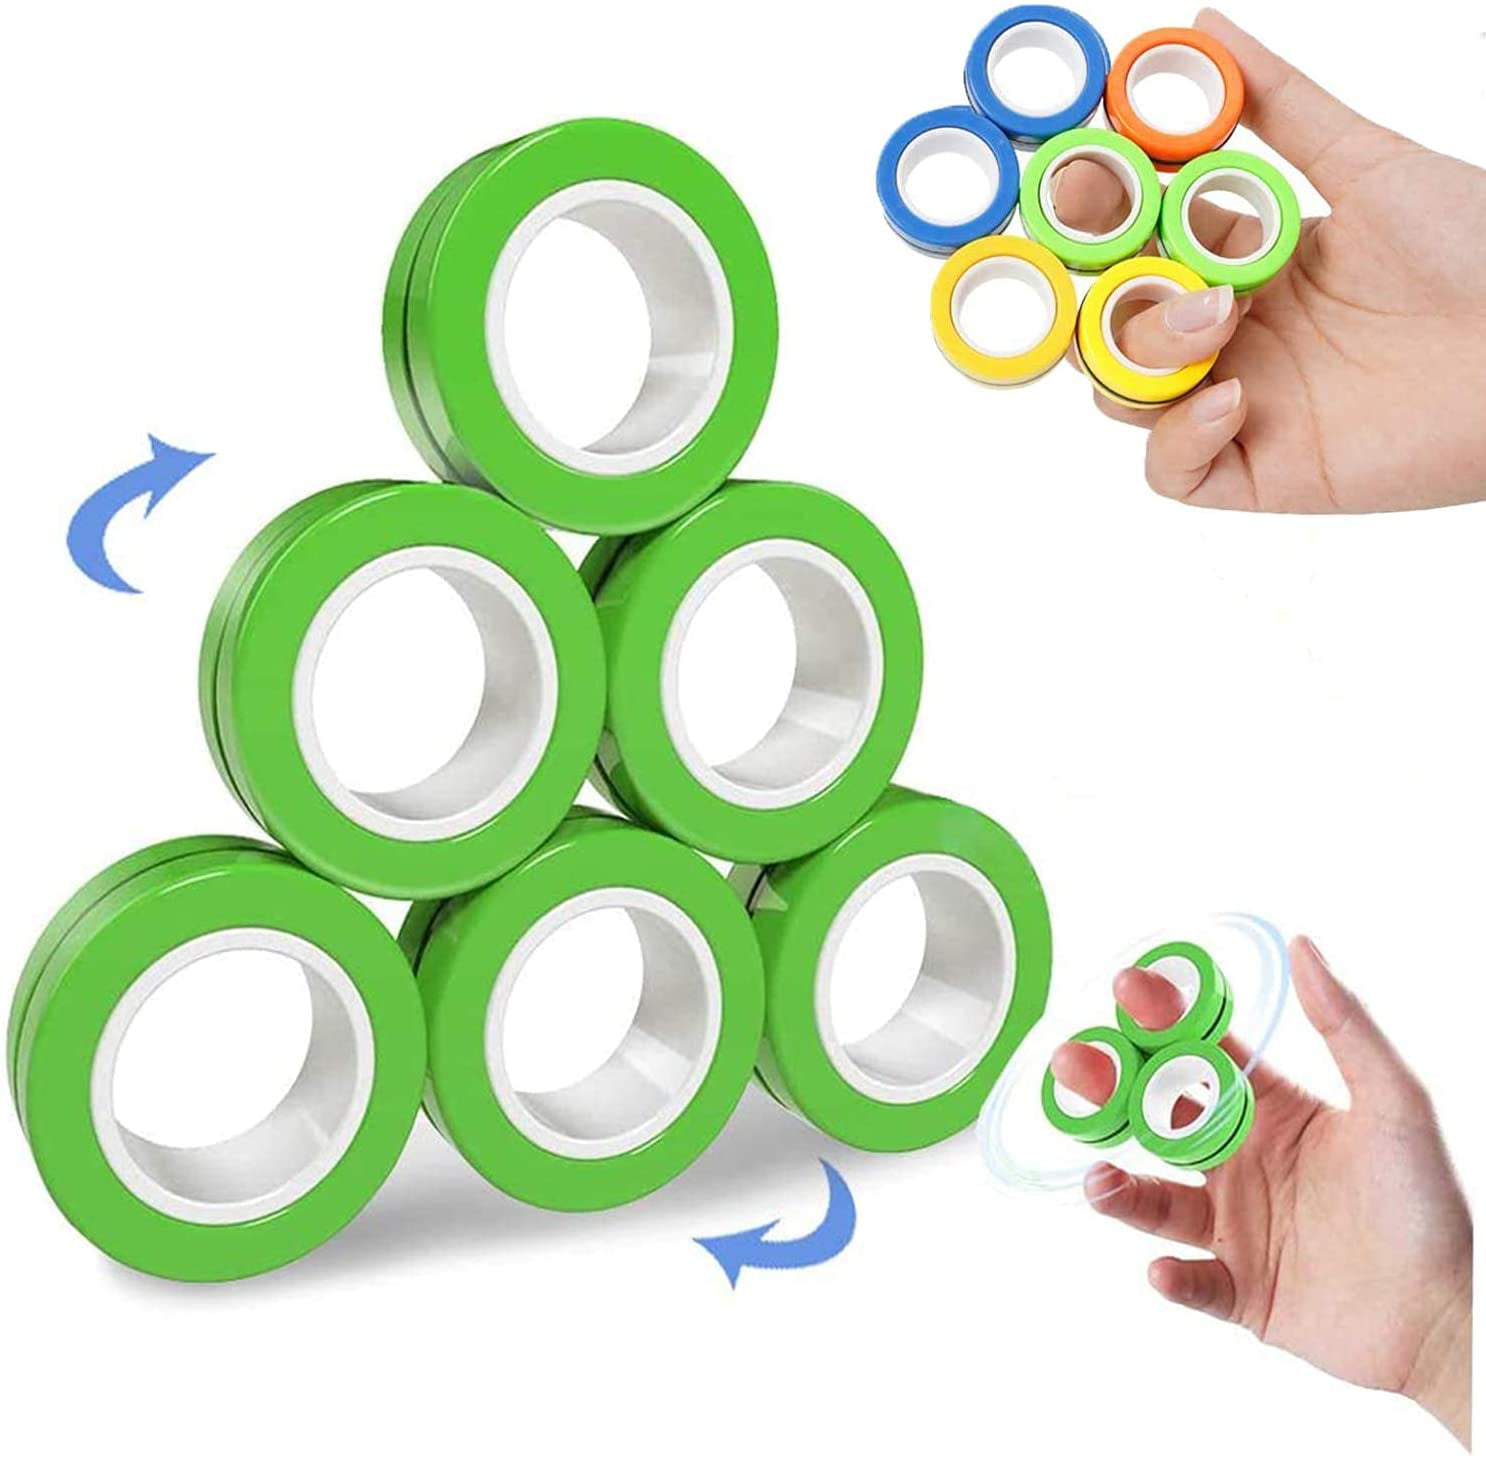 Magnetic Rings Fidget Toys Anxiety Relief Toys Magnet Rings Fidget Rings For Anxiety Fidget Ring Kids Adult Magic Finger Spinning Ring Relieves Anxiety 